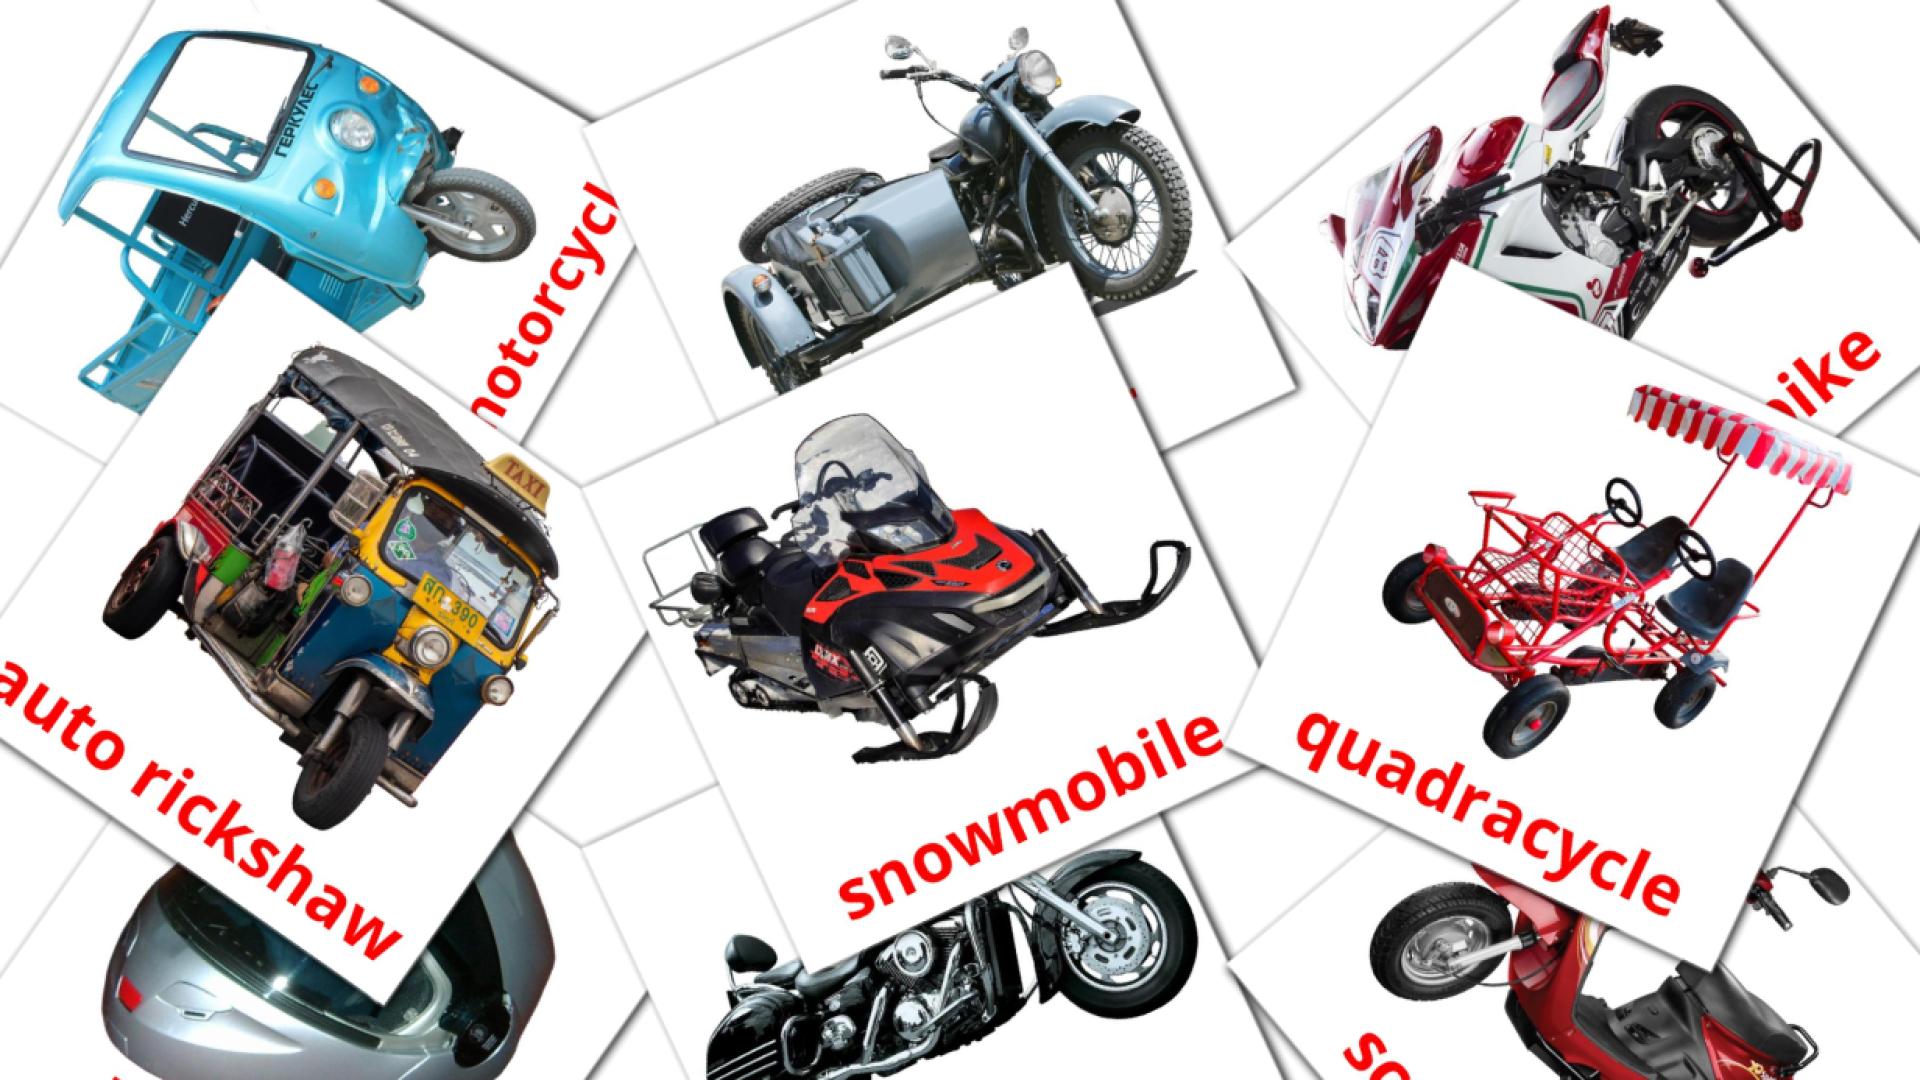 12 Motorcycles flashcards